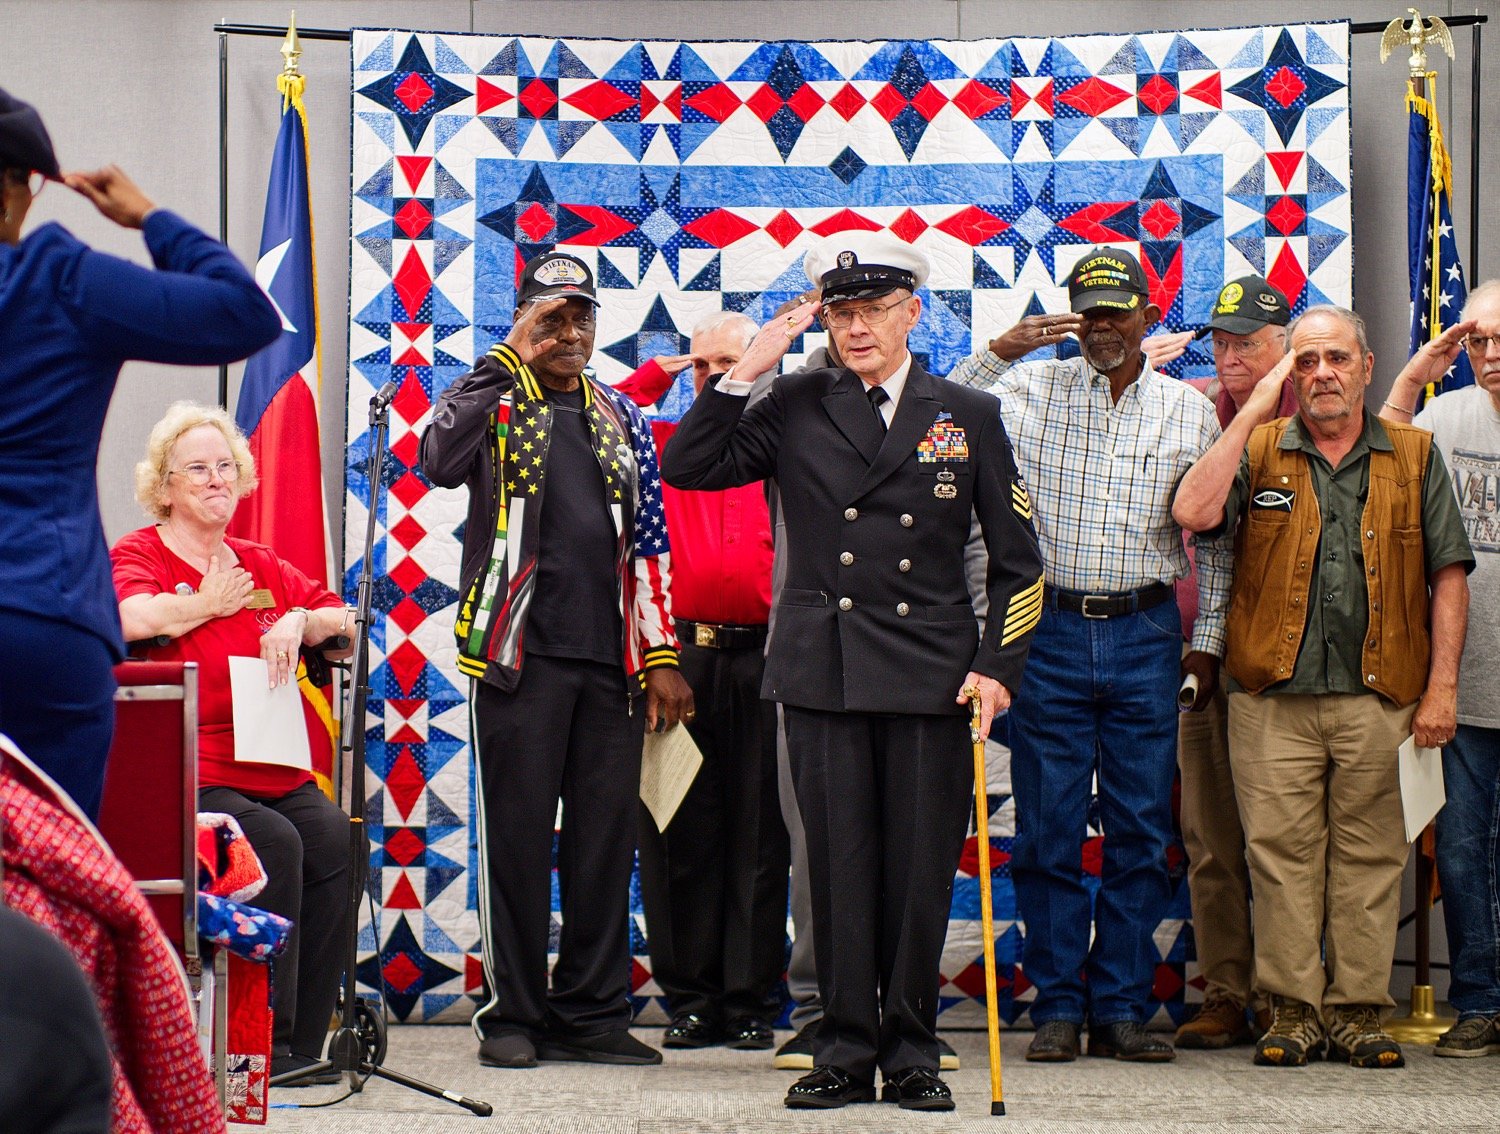 Doc Melott leads veterans in a salute to those who made and presented Quilts of Valor Friday in Quitman. To express his appreciation, "I had to do something," said Melott. [view more veteran appreciation]